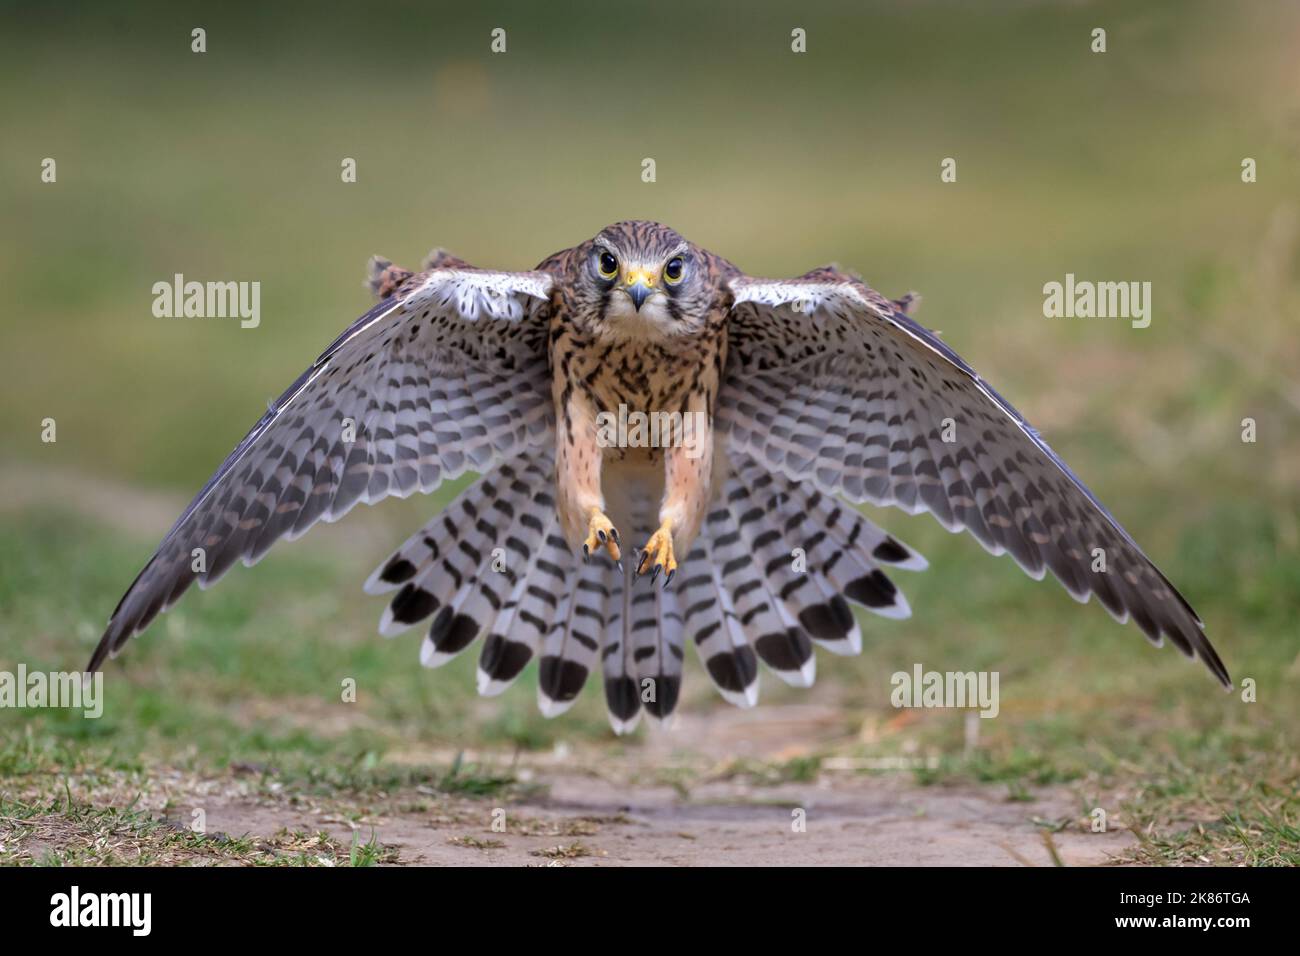 Coming in for the kill. Middlesex, UK: STUNNING images show a young kestrel marching across Middlesex grass in search of snacks as it begins its journ Stock Photo